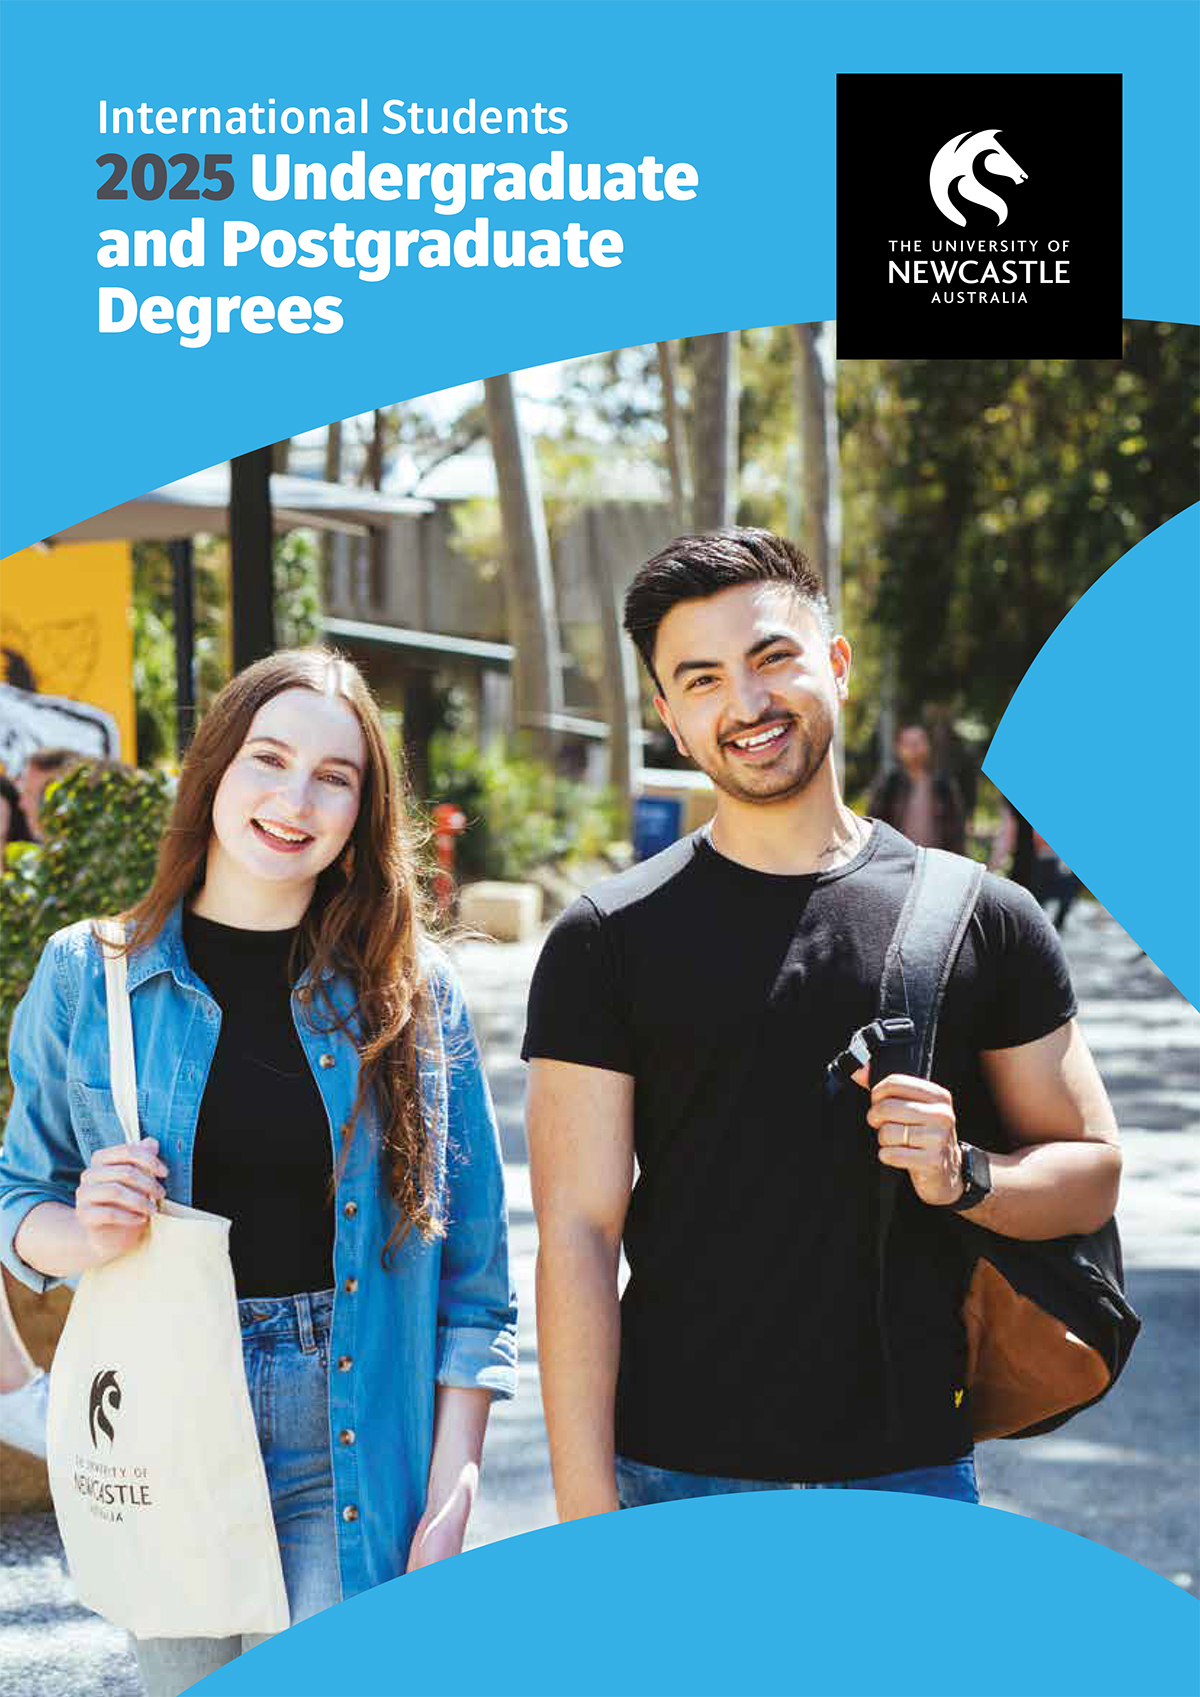 Download our degrees guide-image3